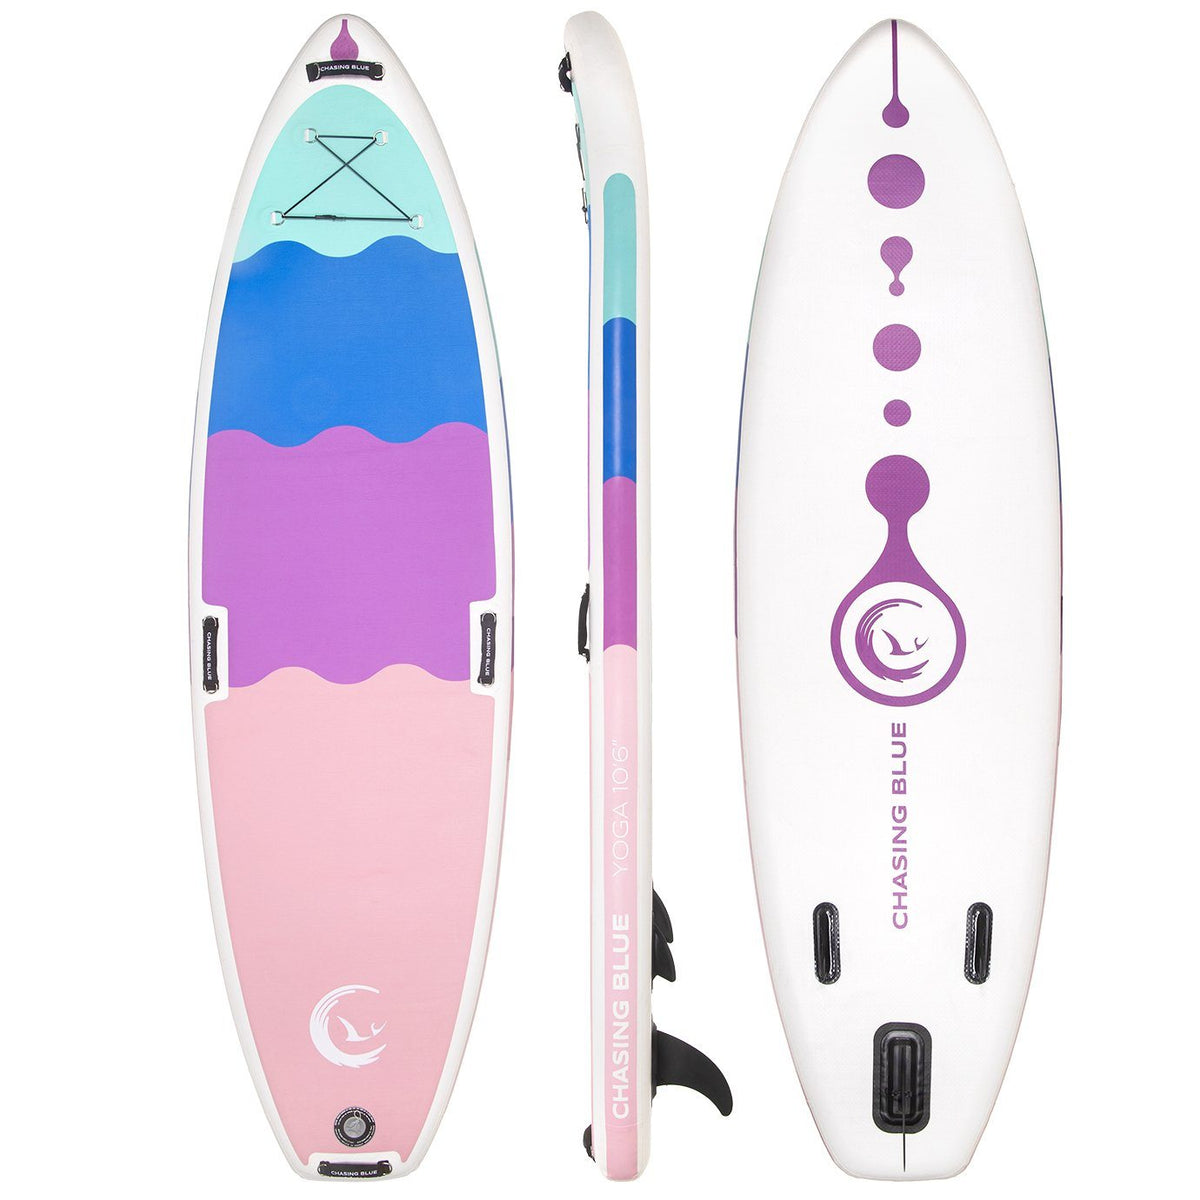 SYNERGY - YOGA iSUP BOARD OutdoorMaster